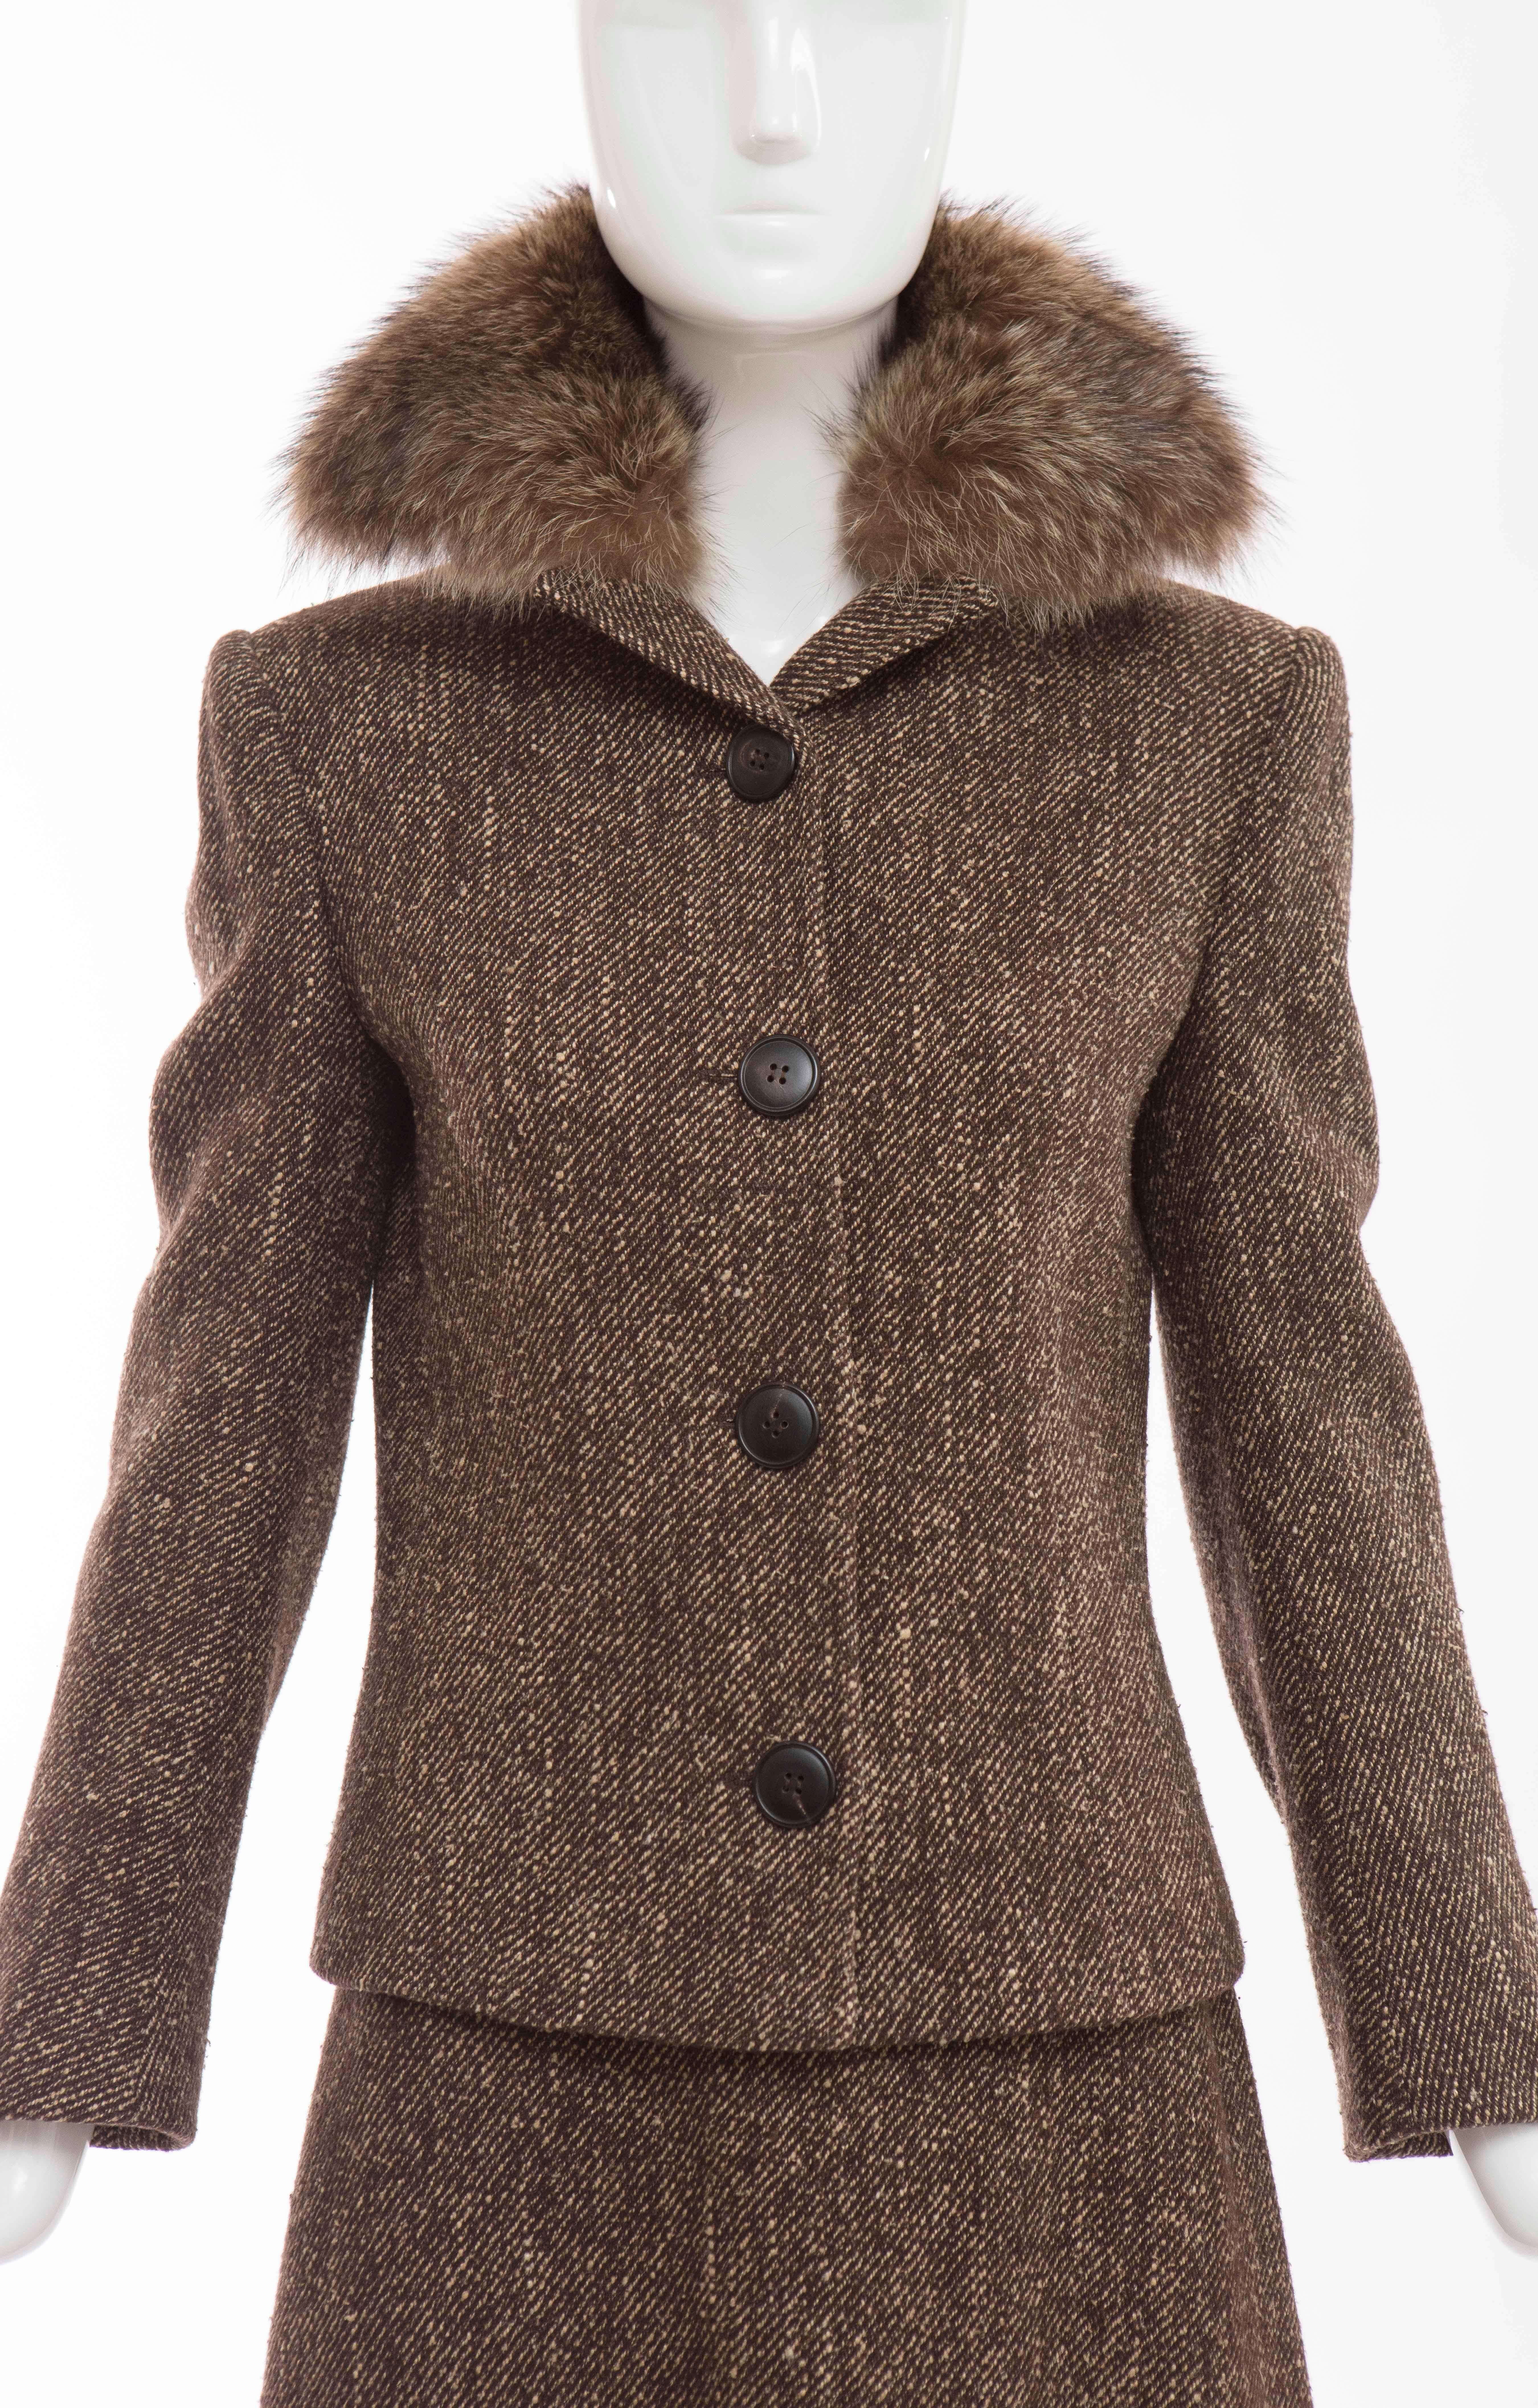 Dolce & Gabbana Brown Tweed Skirt Suit With Fur Collar In Excellent Condition For Sale In Cincinnati, OH